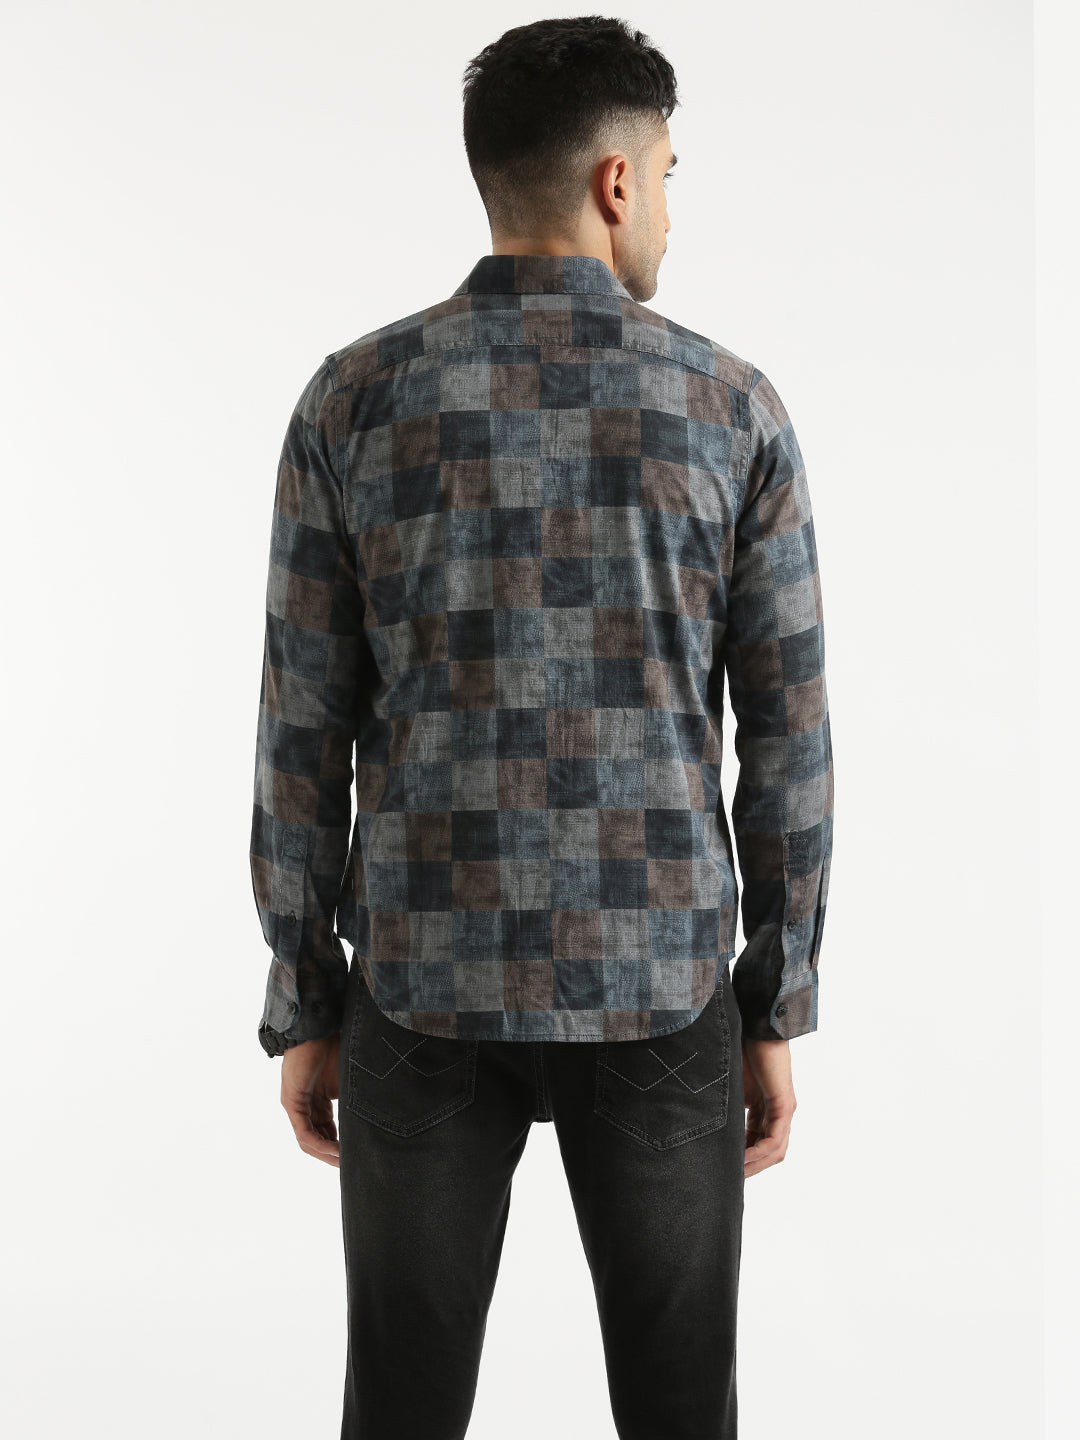 Eclectic Checkered Pattern Shirt